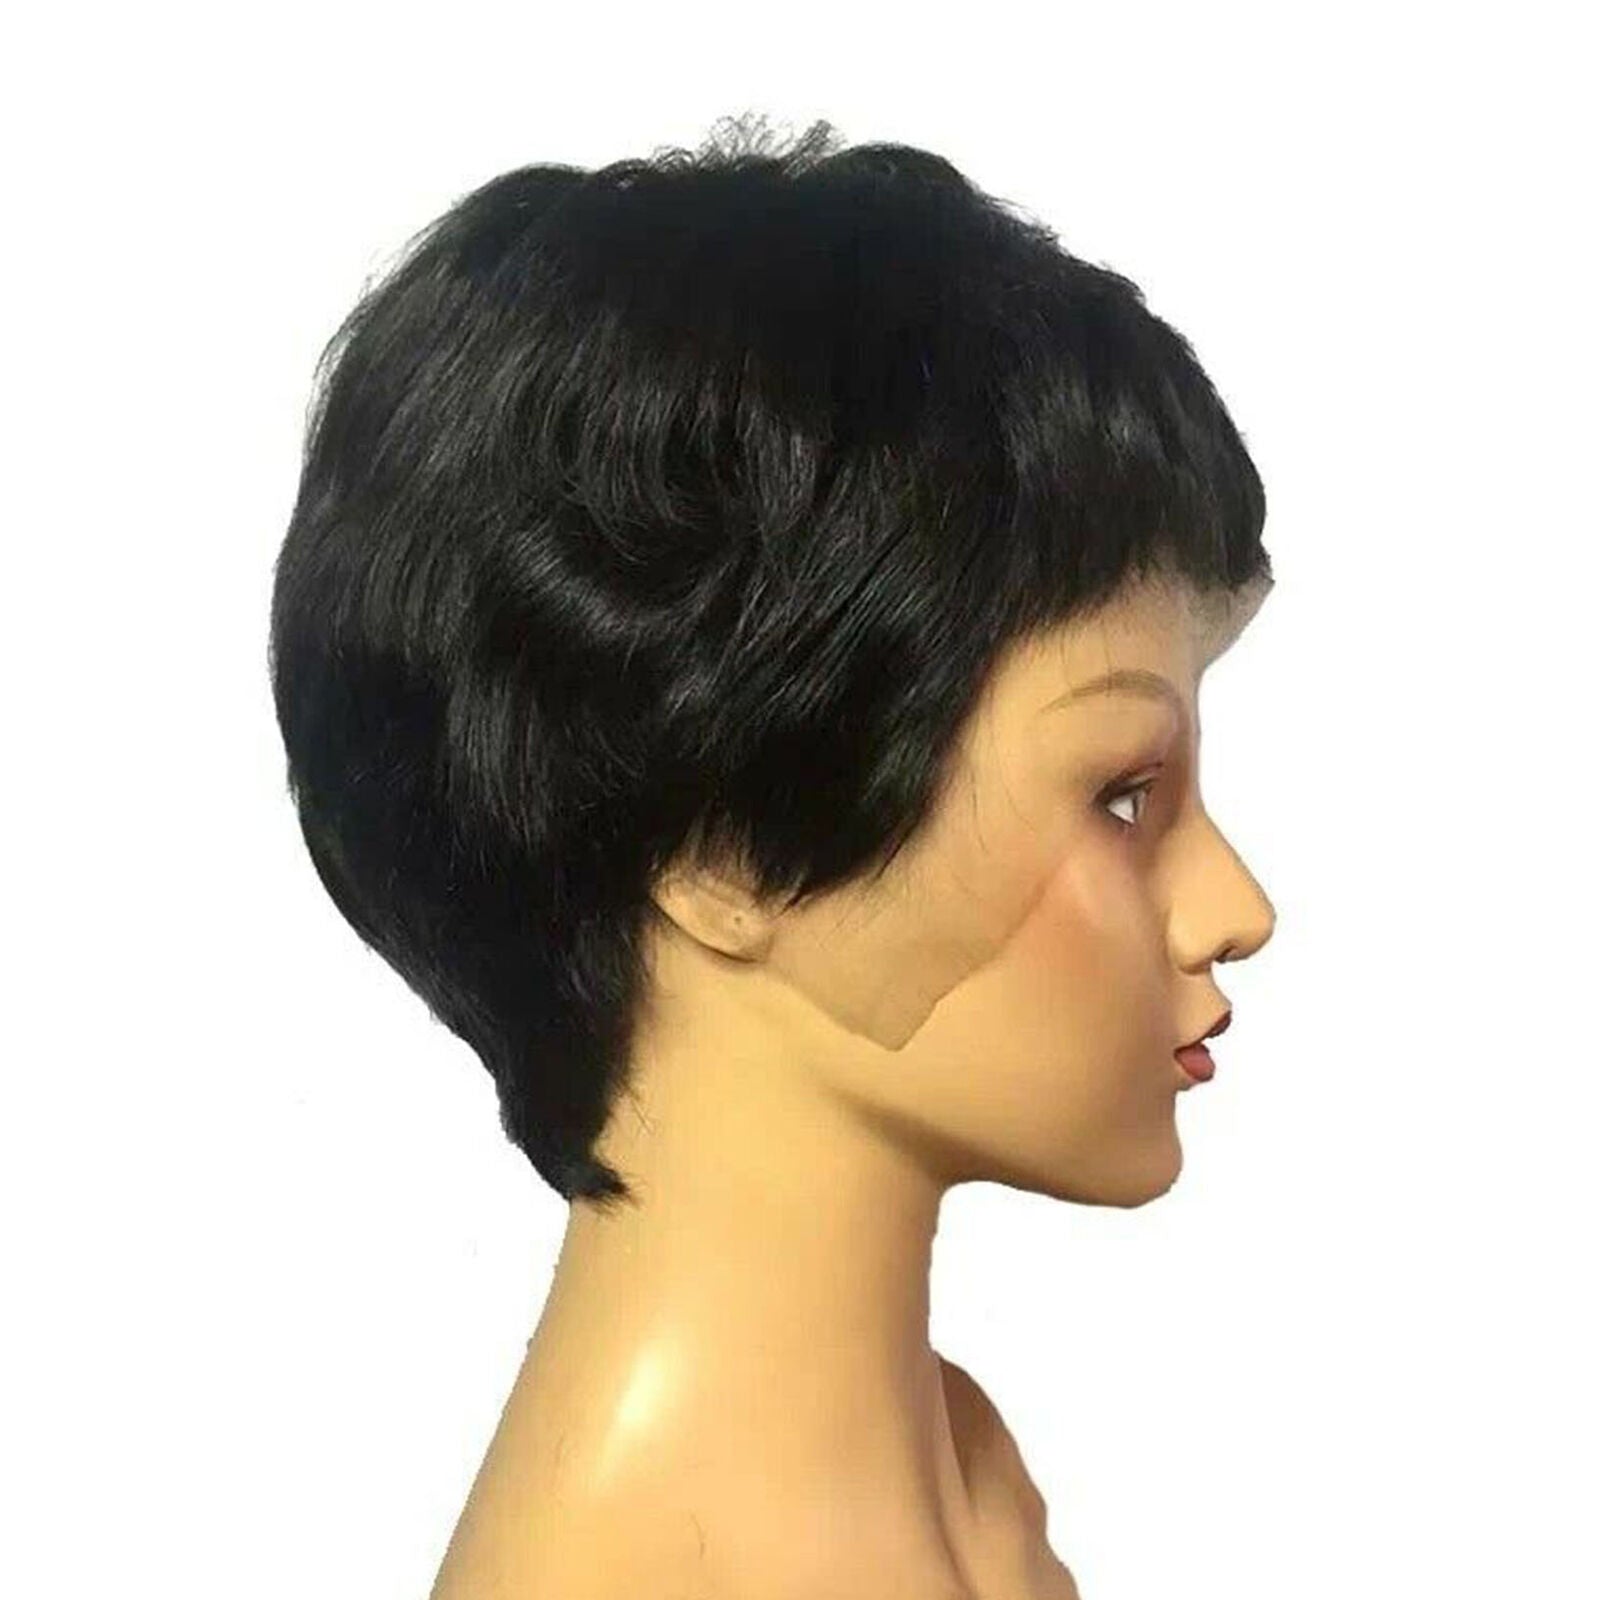 Women's Black Wig Short Straight Synthetic Hair w/Lace Natural Fashion Looking